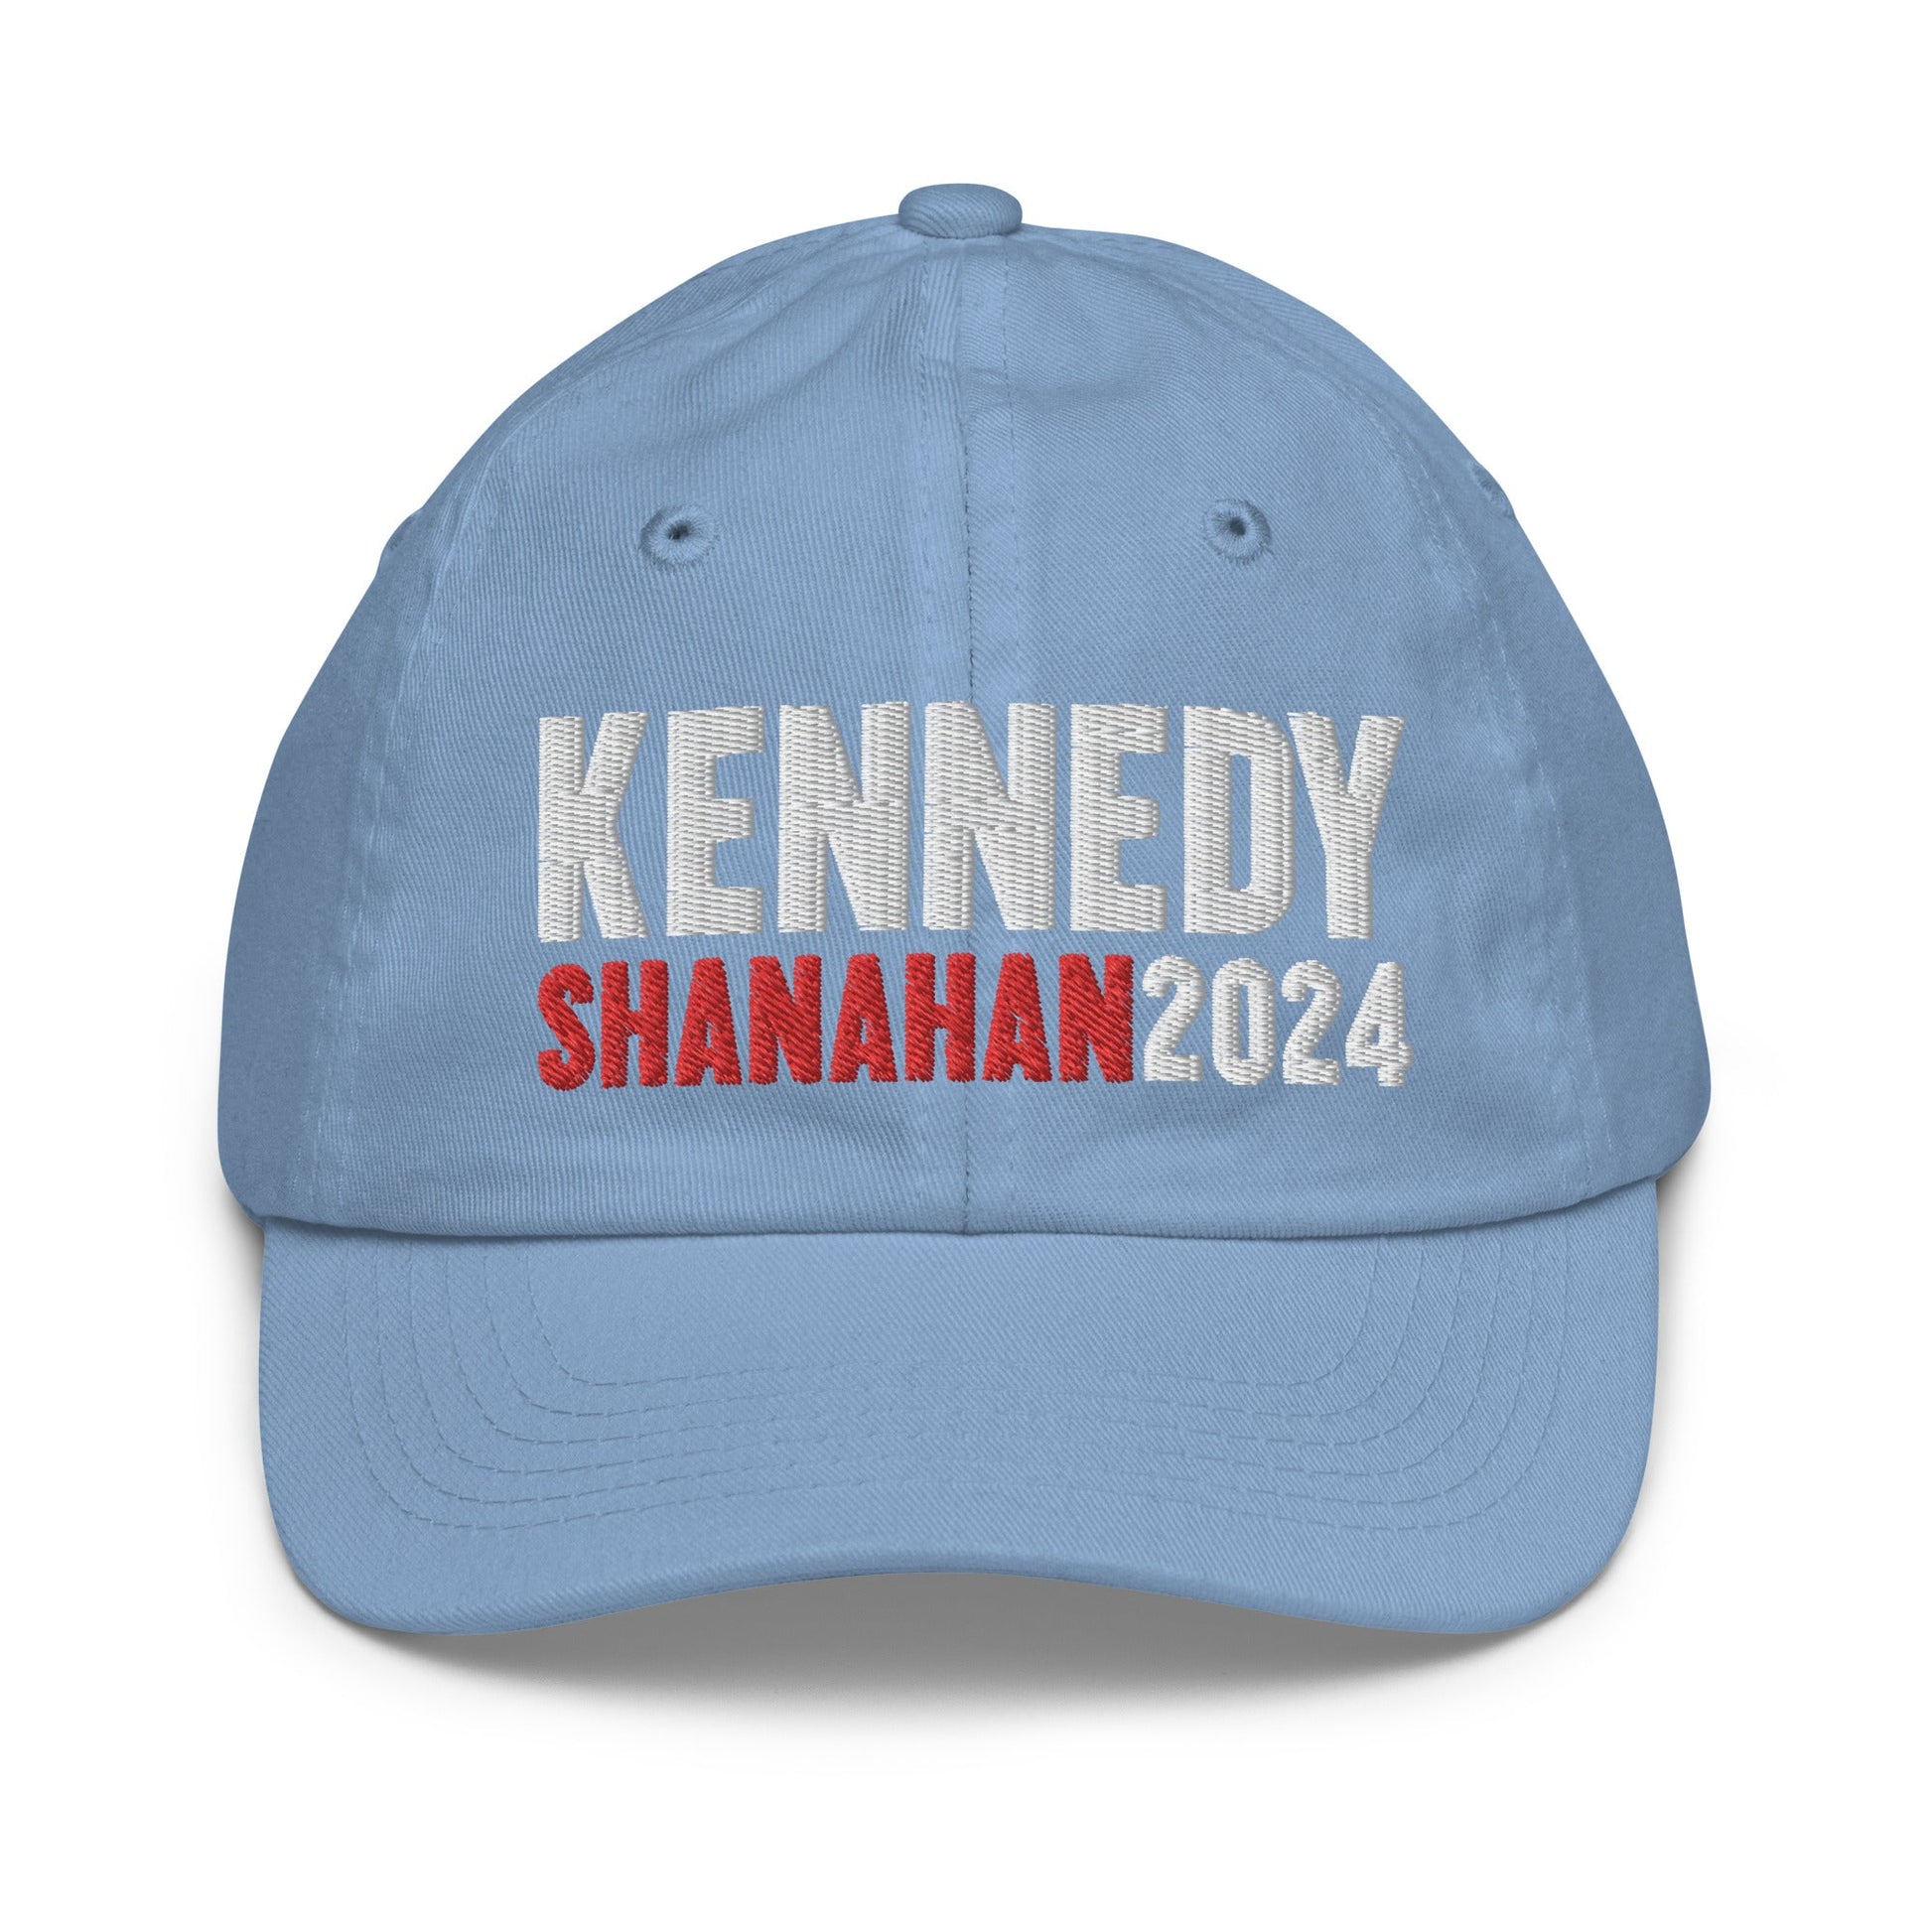 Kennedy Shanahan Youth Baseball Hat - TEAM KENNEDY. All rights reserved